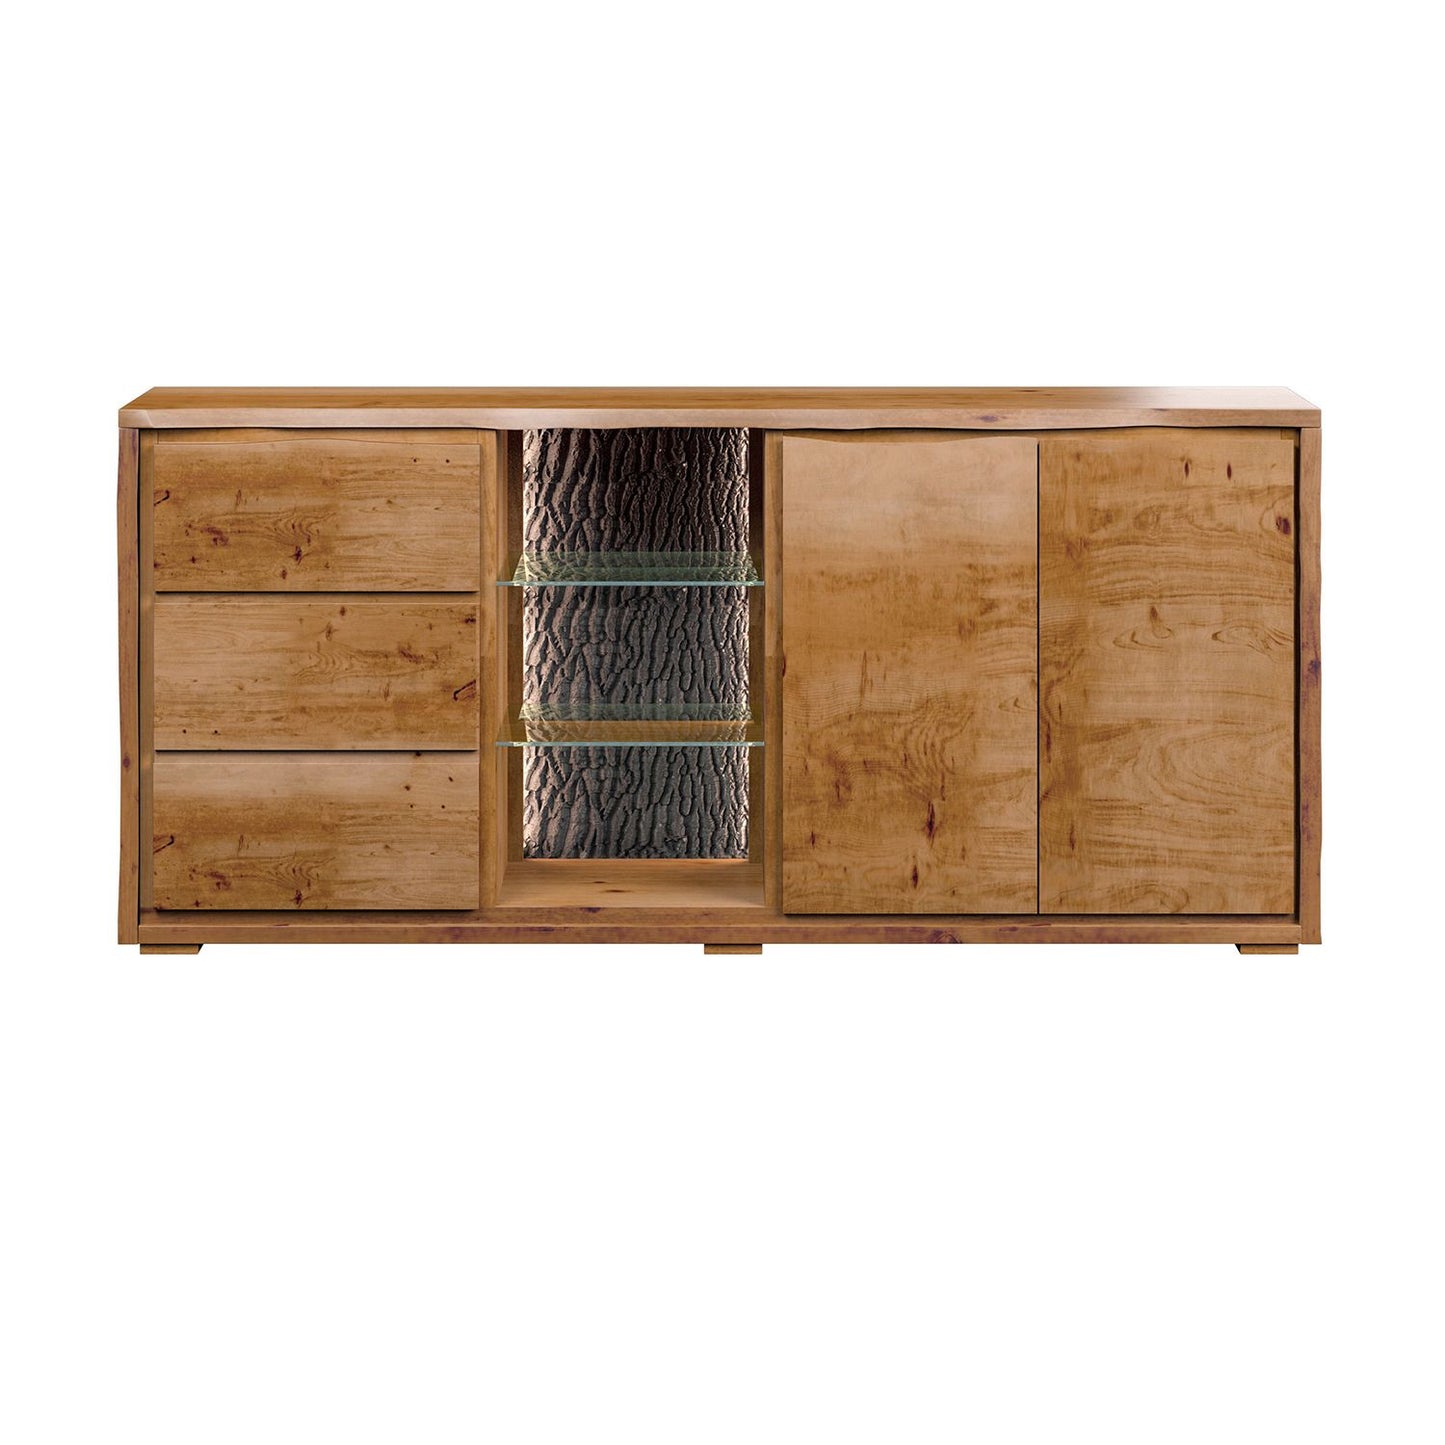 Hoxton Russet Sideboard - Large